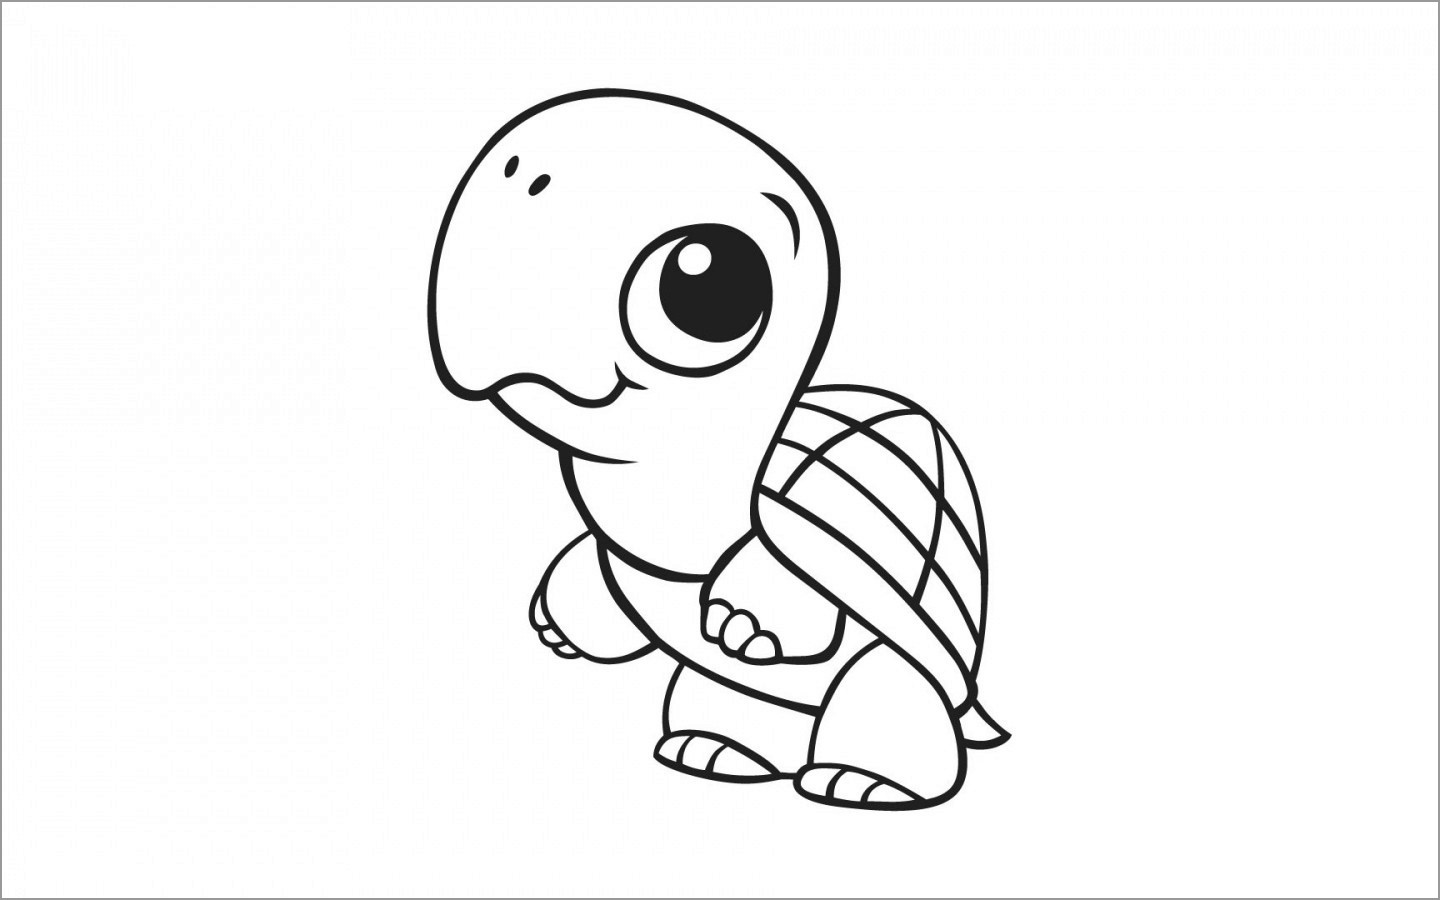 Baby Turtle Coloring Page